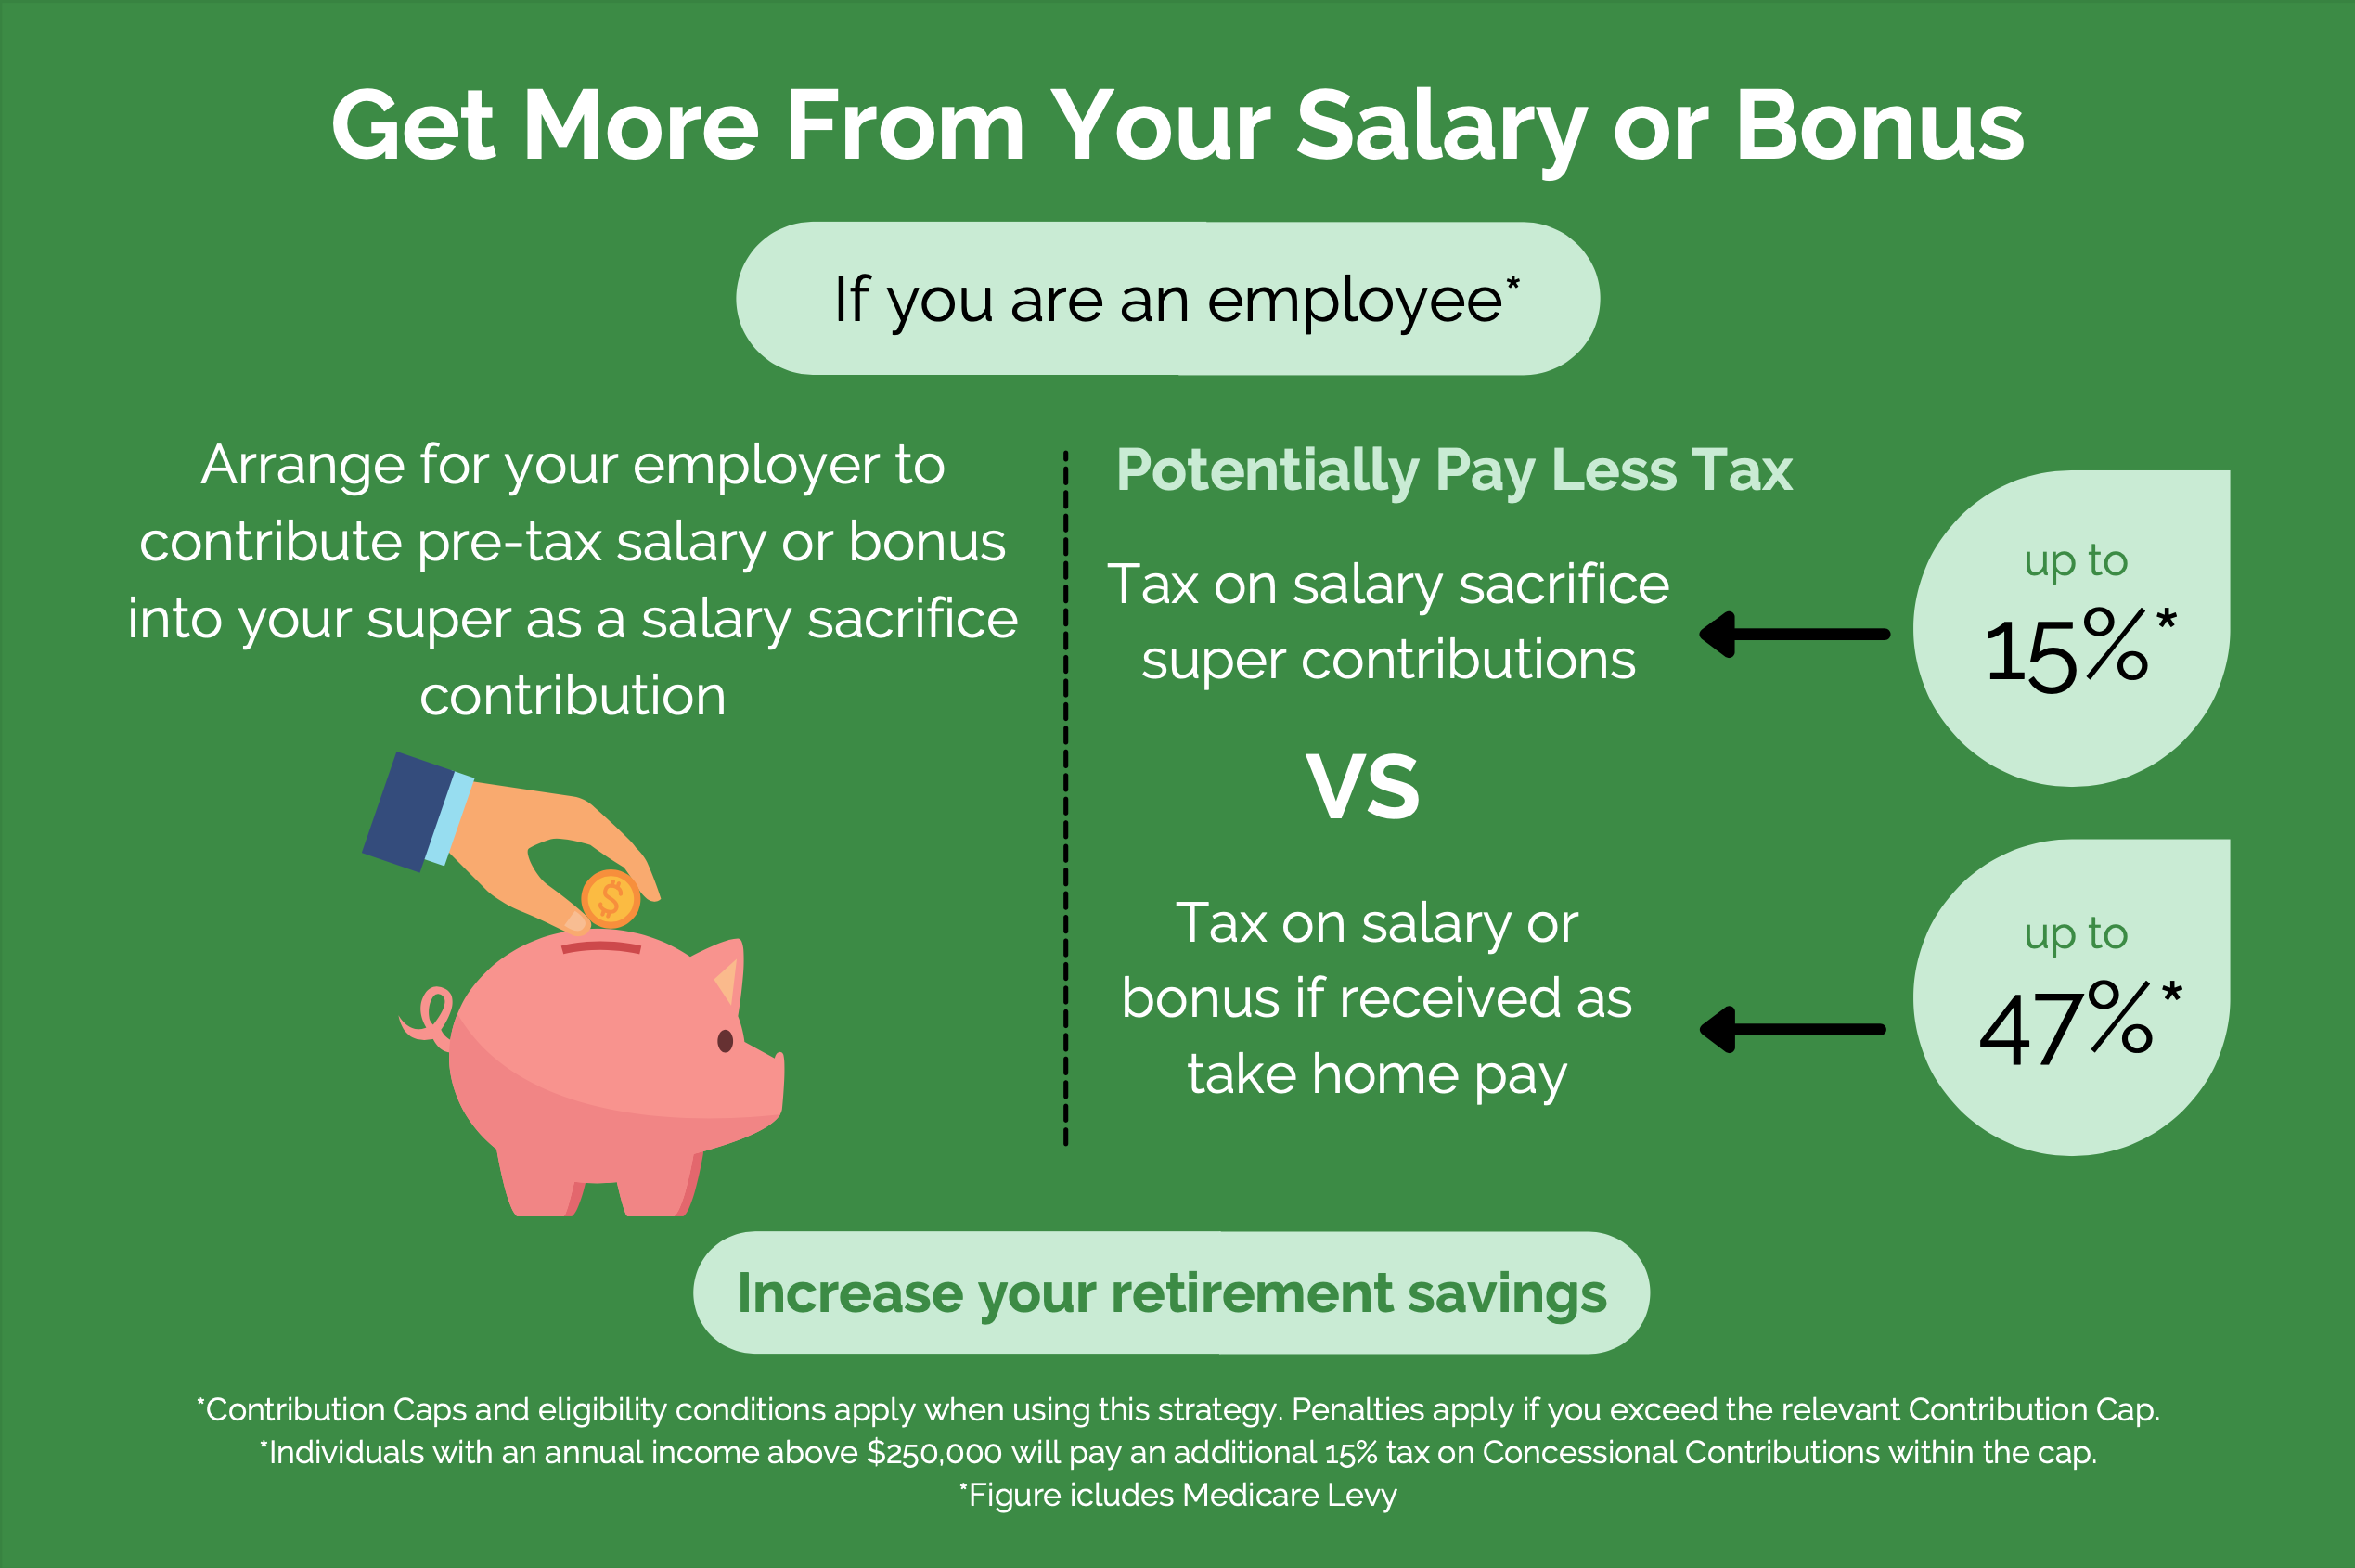 eofy tax tips for super contributions 